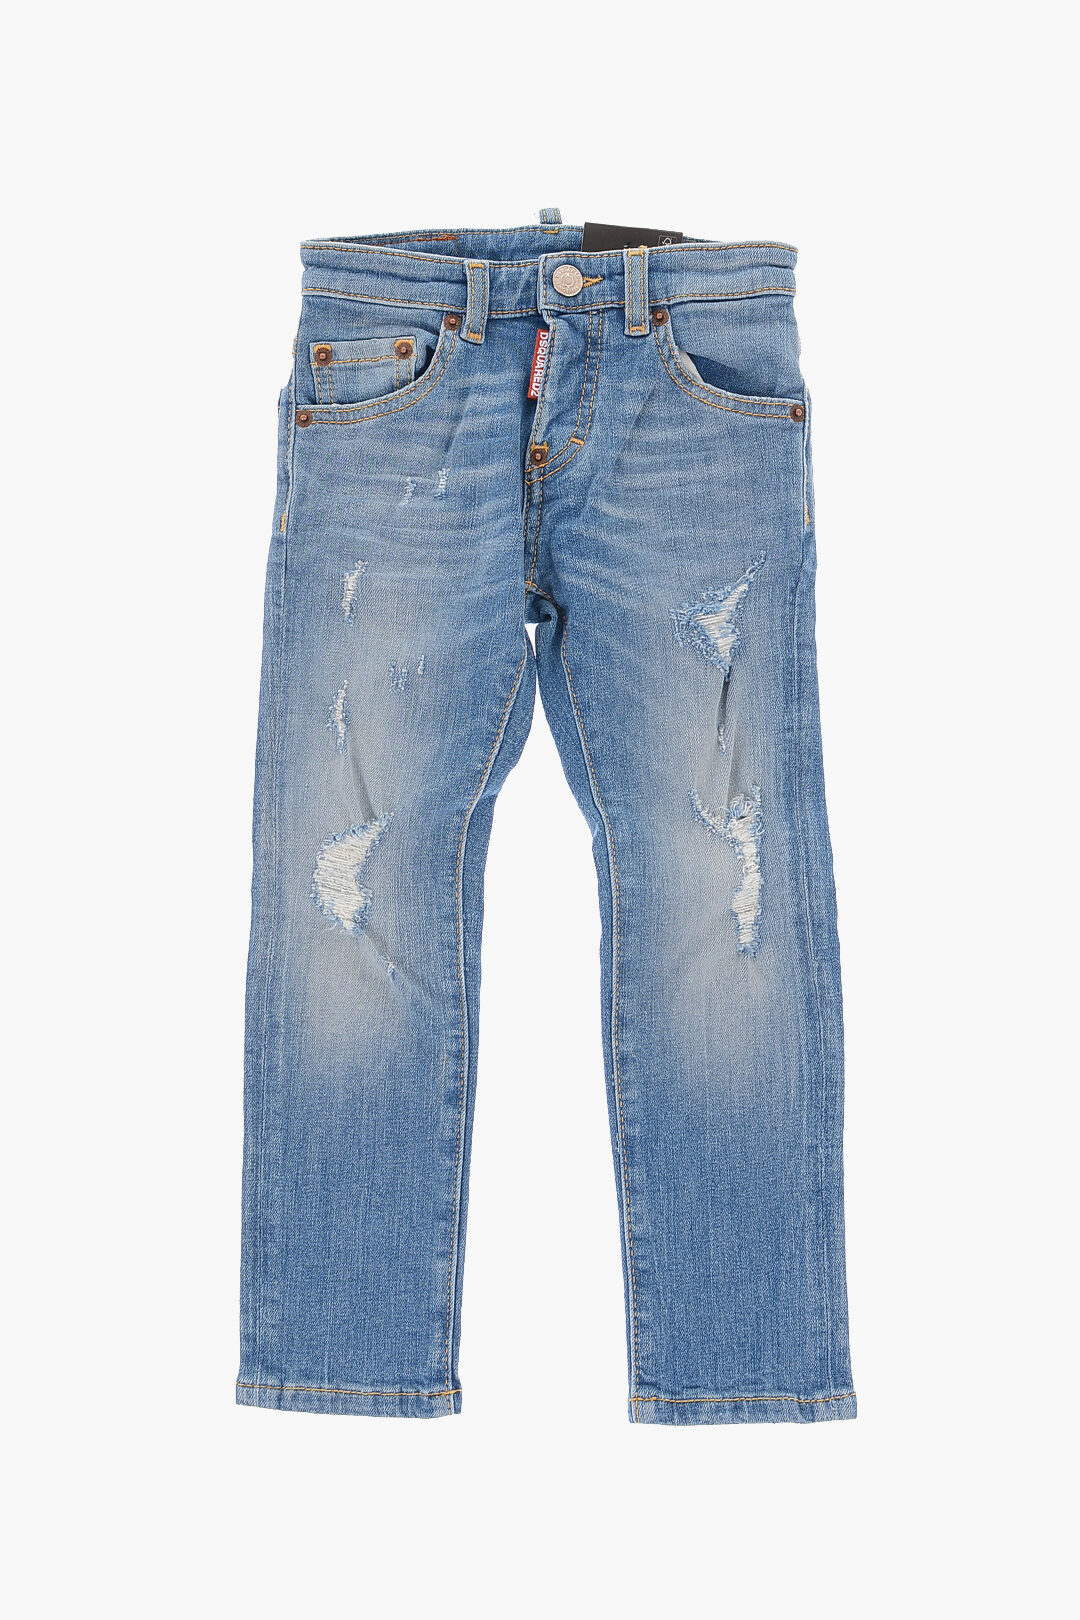 DSQUARED2 ディースクエアード デニム DQ0236 D009G DQ01 ボーイズ VINTAGE EFFECT COOL GUY JEANS 【関税・送料無料】【ラッピング無料】 dk